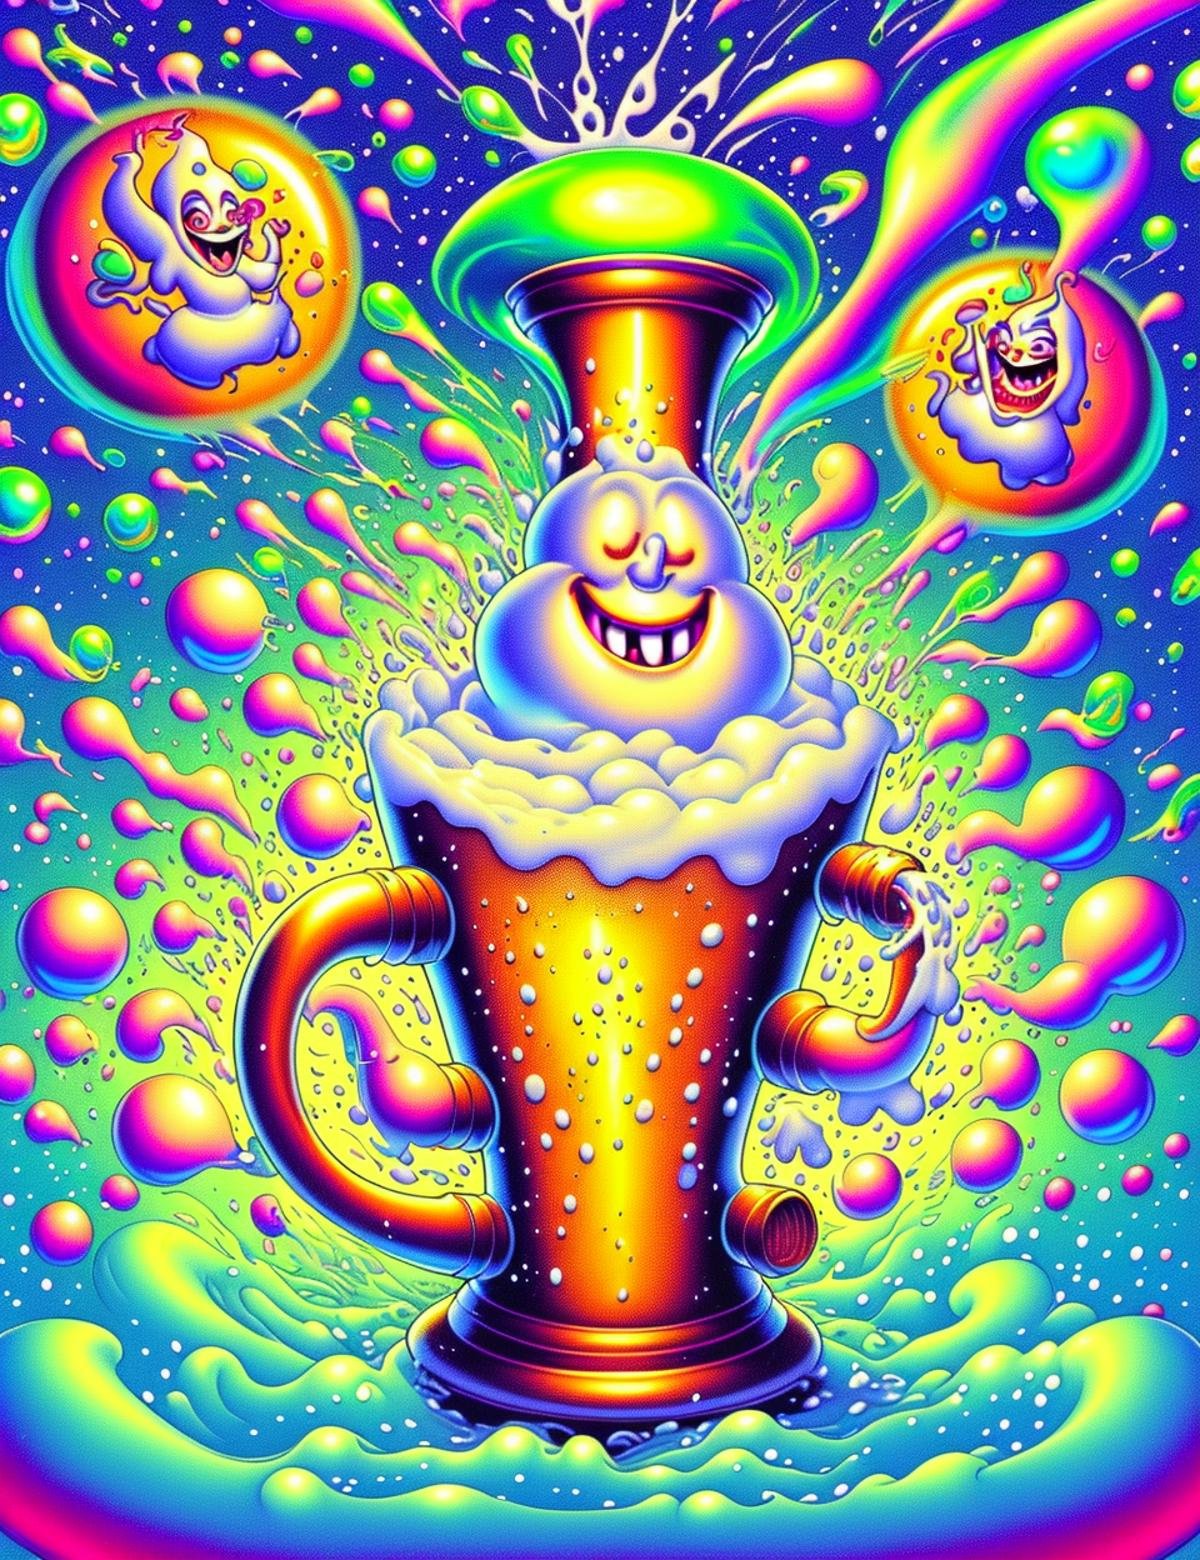 DonMC4745tr0ph1c female Beer Spirit, Mythical jovial rotund being,lighthearted convivial joy,clusterd with yellowish floating foamy beer bubbles, Resembles a friendly well dressed ghostly ethereal otherworldly bartender, large overflowing tankard, , spreading merriment and good cheer, twinkle in its eye, hearty laugh , <lora:DonMC4745tr0ph1c:1>